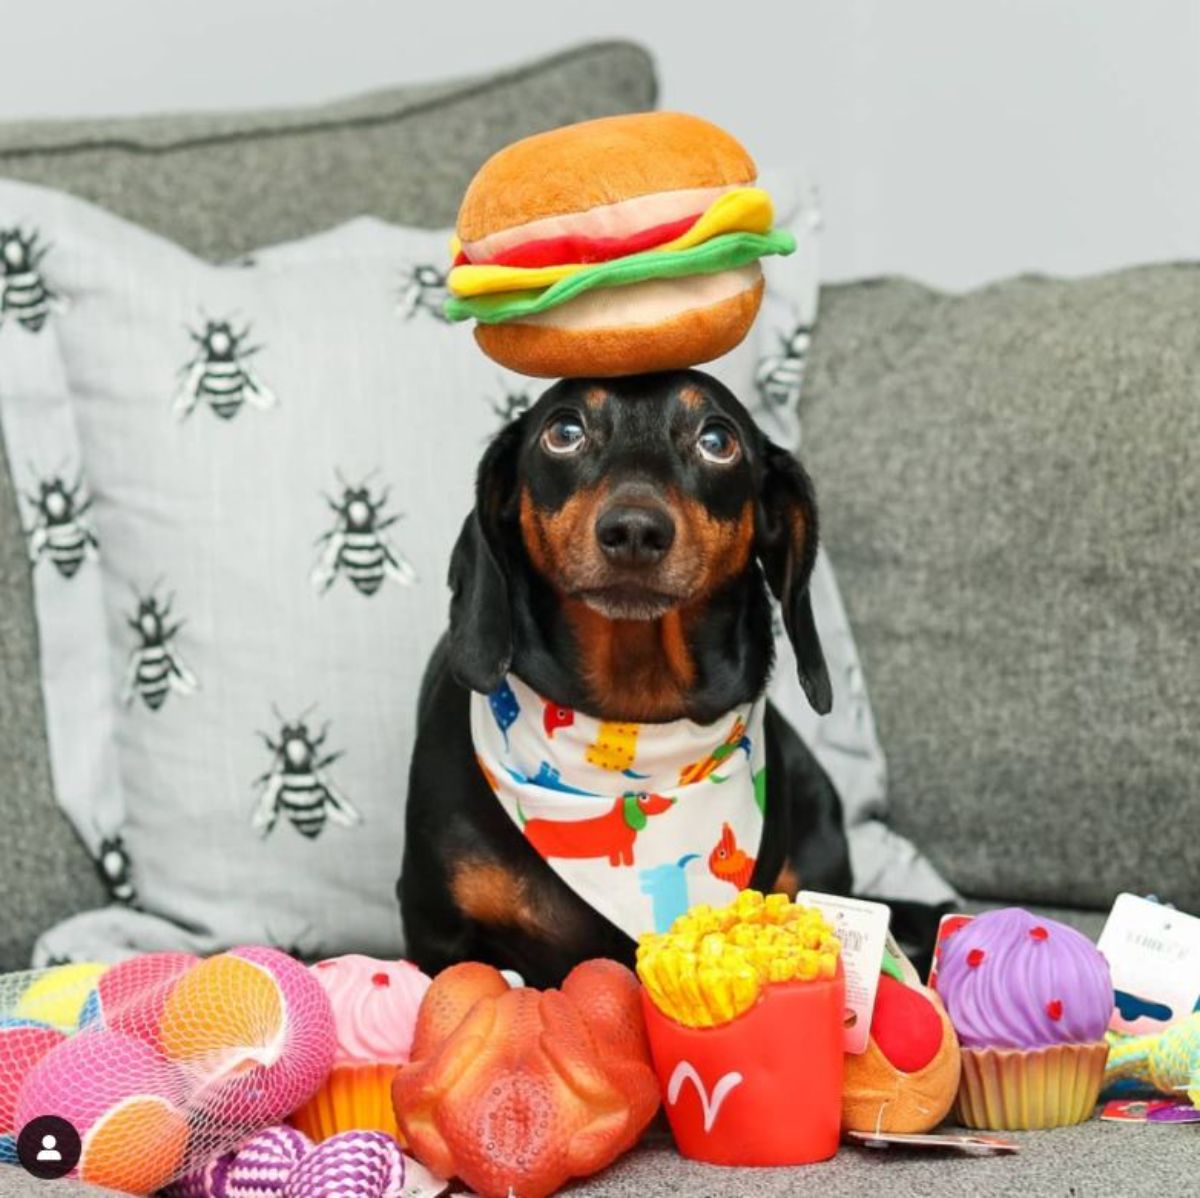 black and brown dachshund with a stuffed hamburger toy on the head and surrounded by stuffed food toys